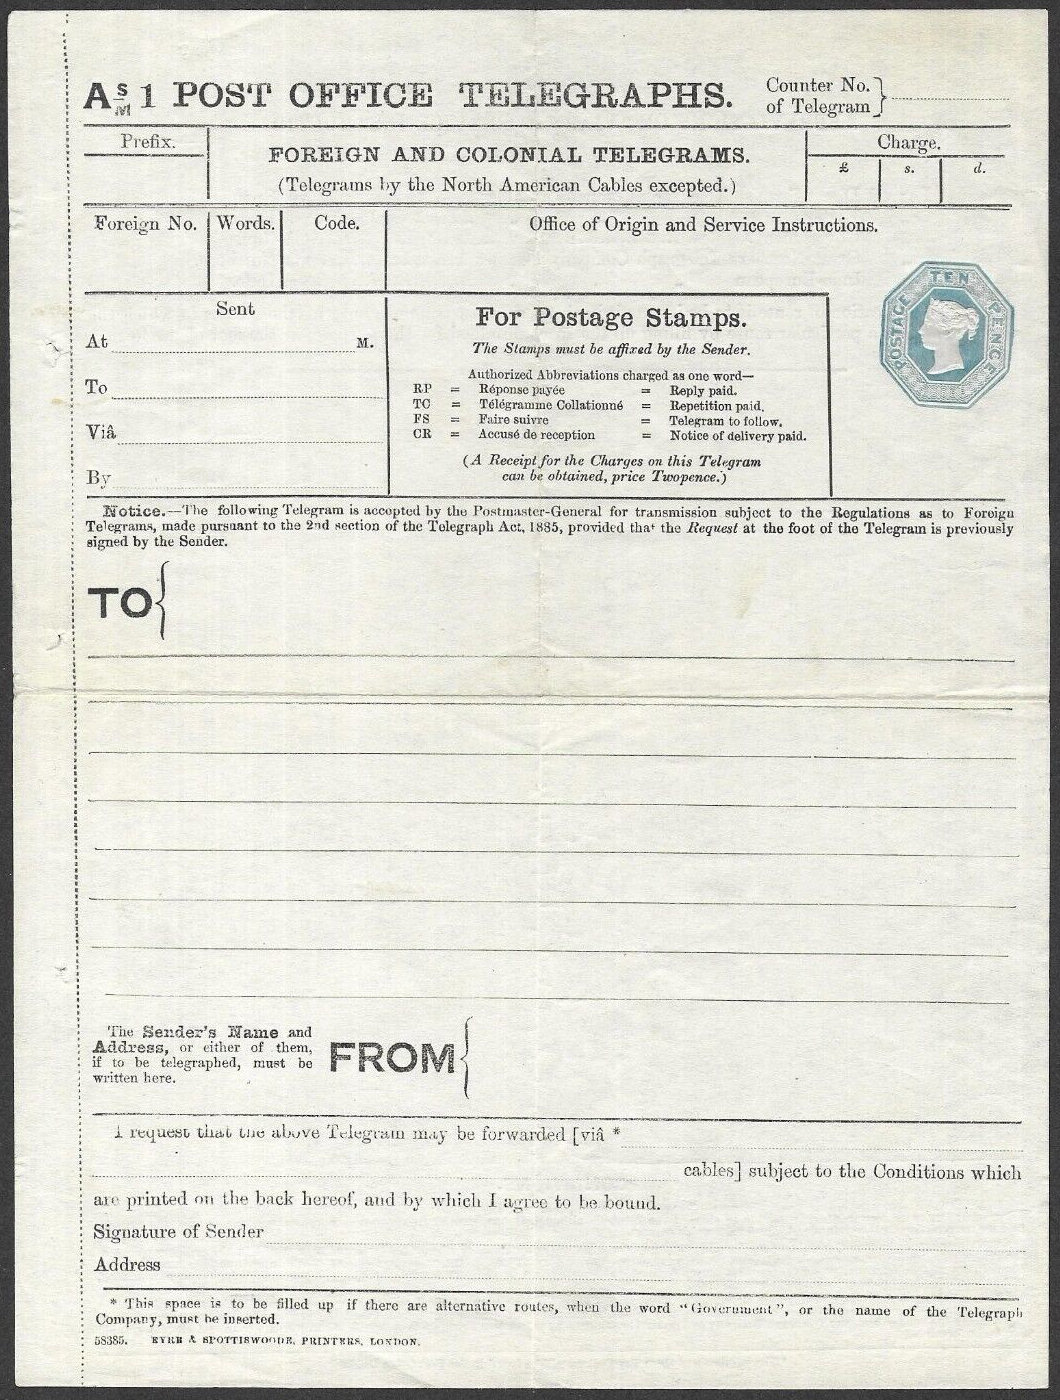 10d A1S/M Post Office Telegraph Form - front